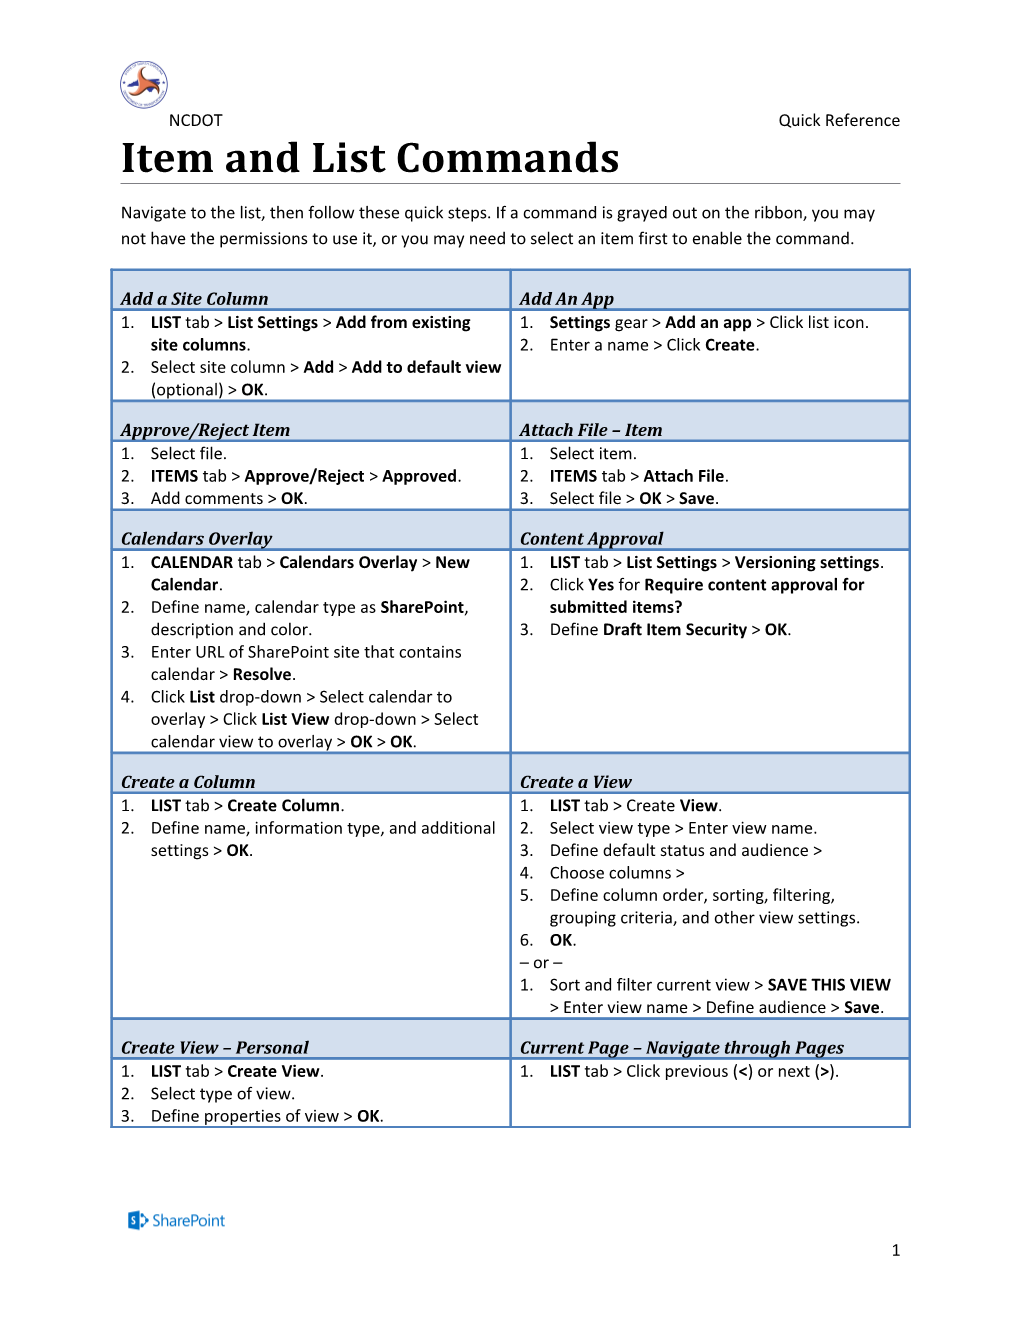 Item and List Commands